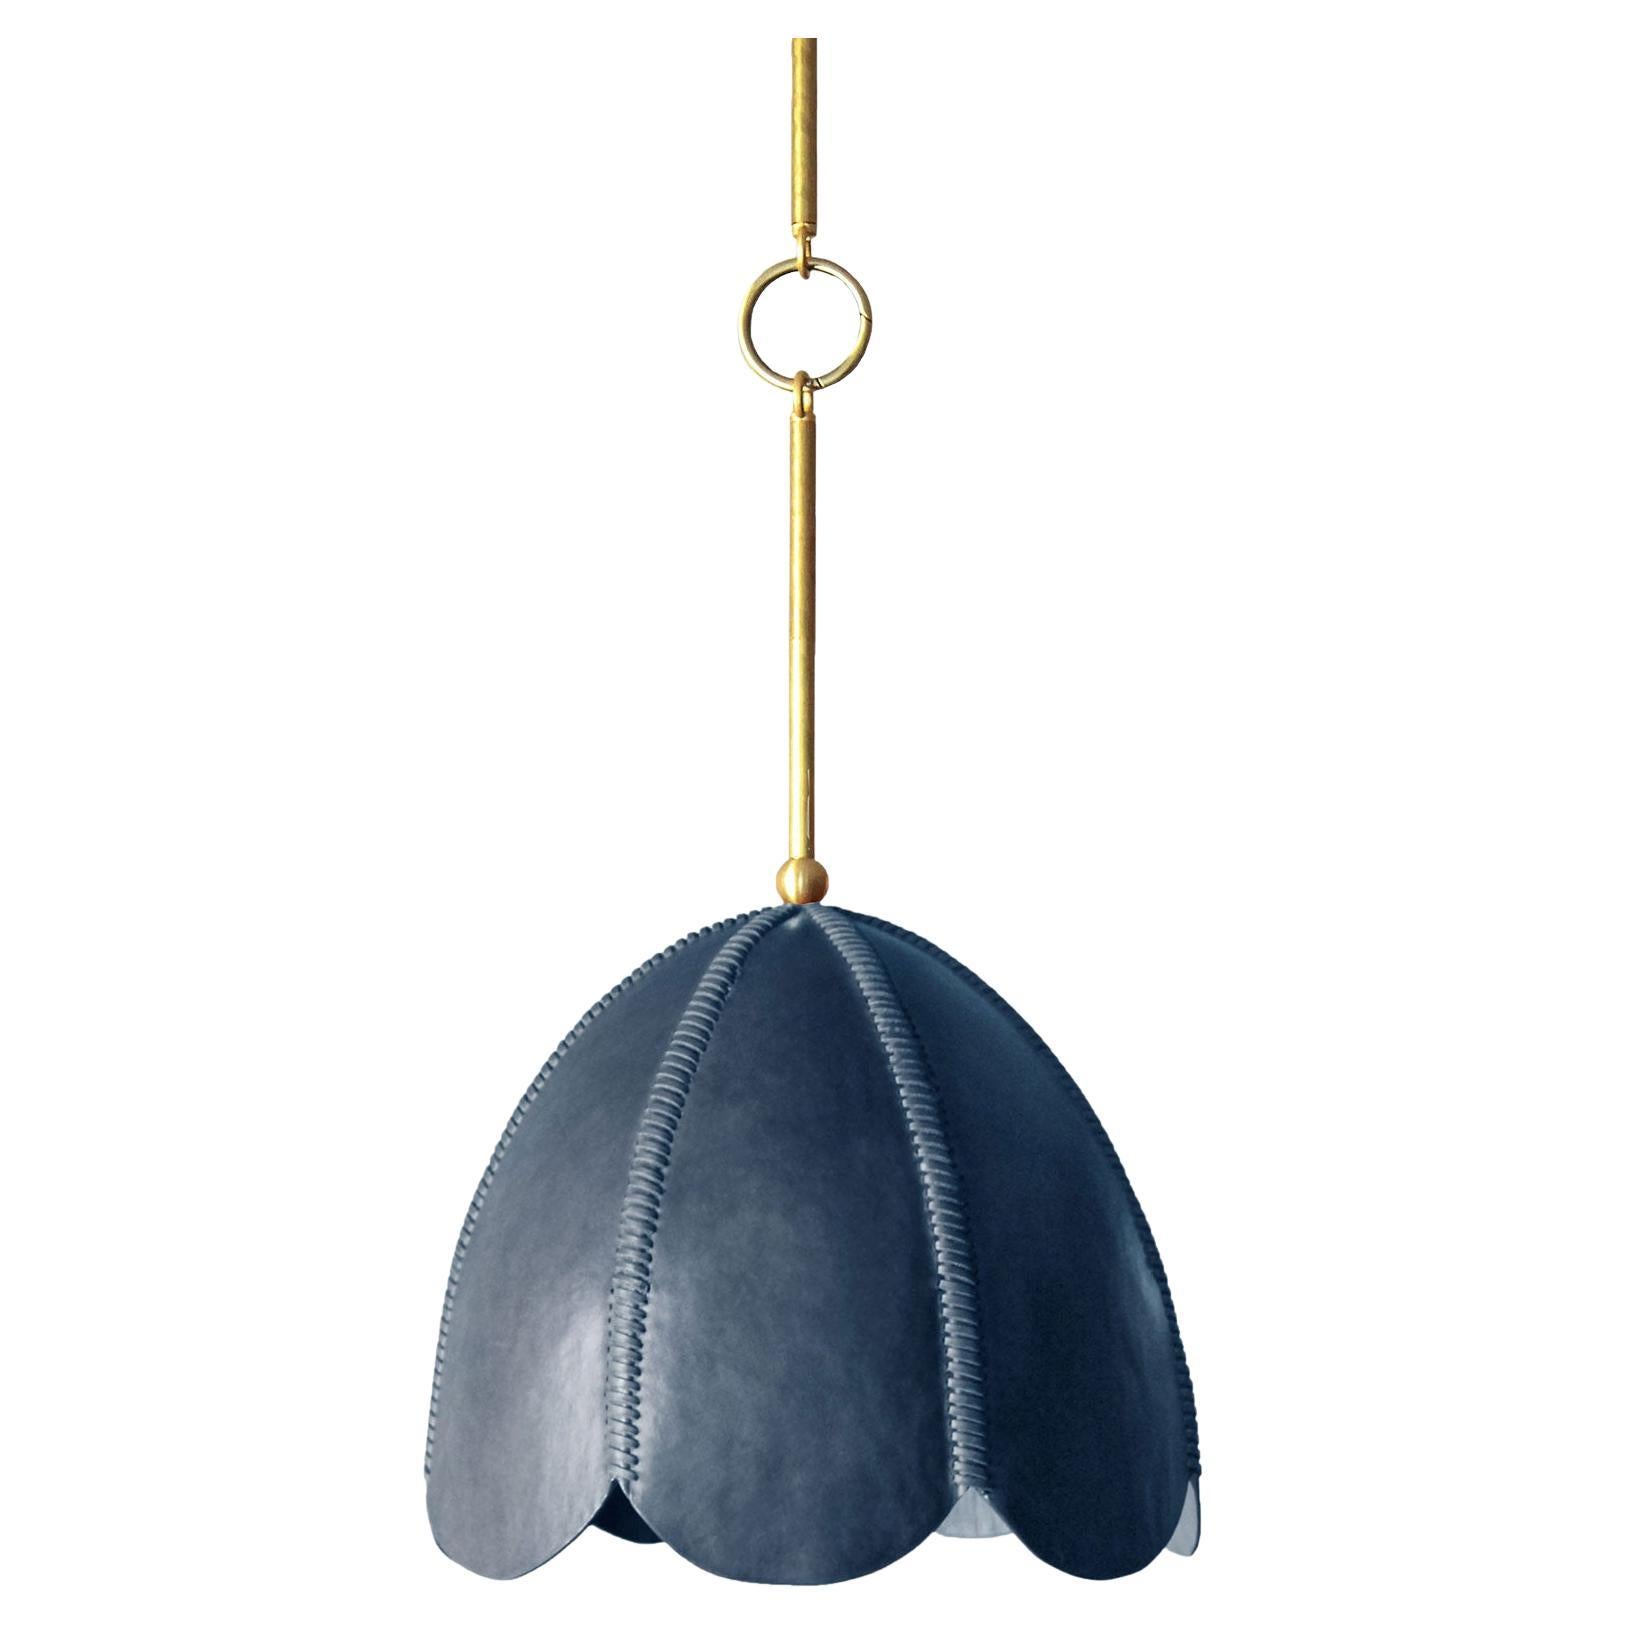 Leather Pendant Light in Cobalt, Doma, Talabartero Collection Saddle Lamp